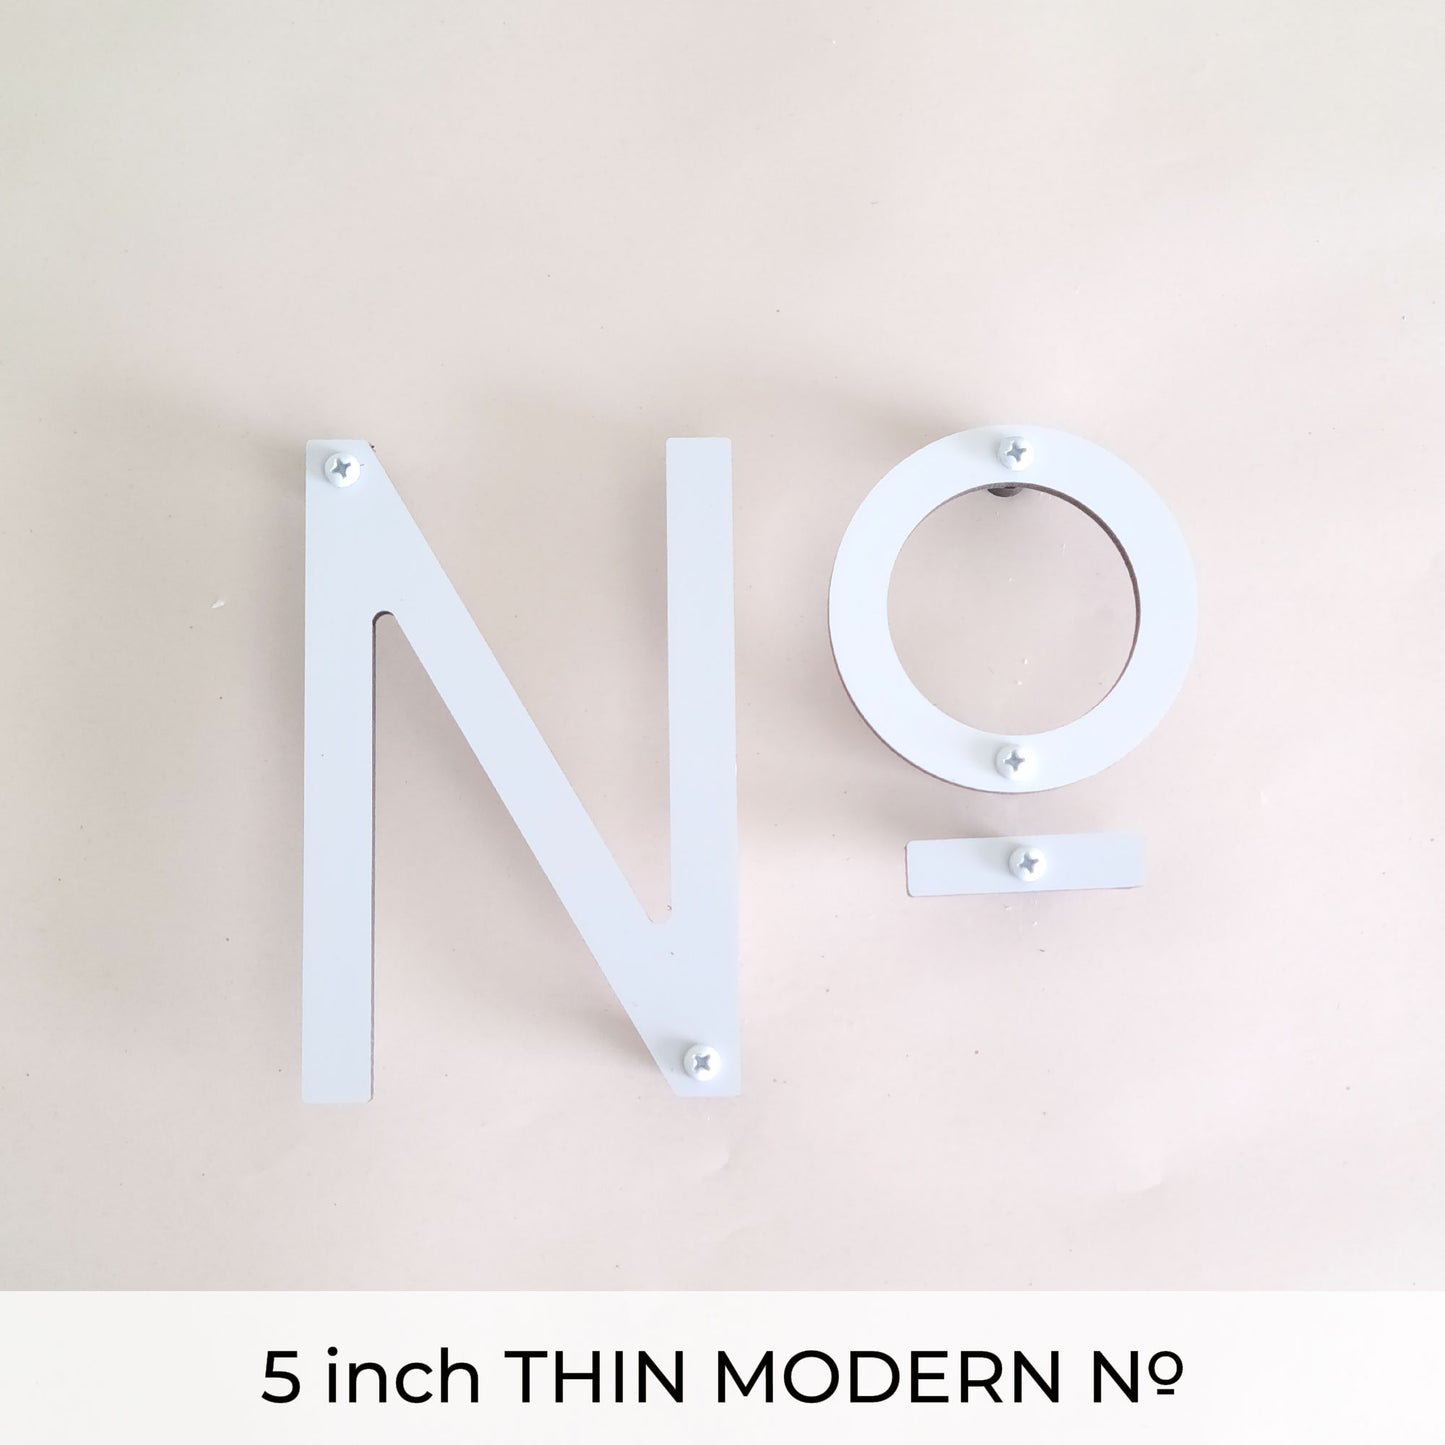 THIN MODERN House No. letters for address sign